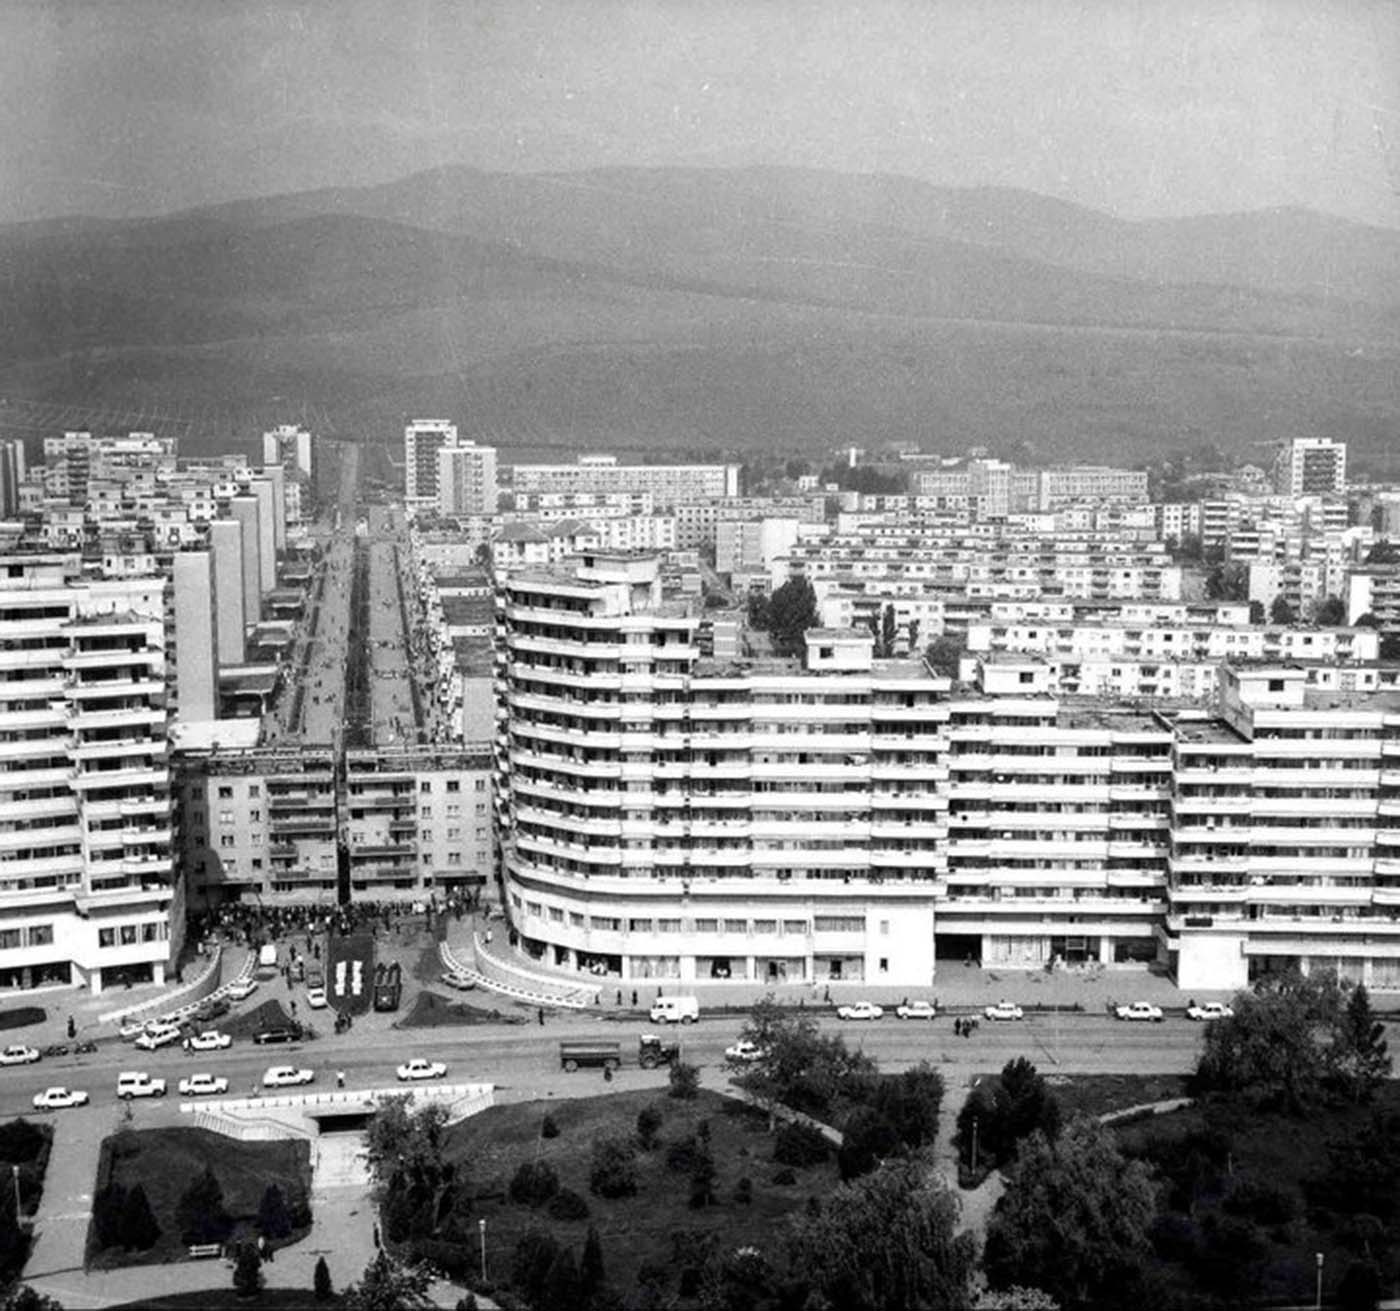 Ceausescu, the communist leader of Romania, liked to change streets. He would literally go through cities, decide that this building or that shouldn't be there (he really didn't like churches, for instance), and either ordered it demolished, or moved.